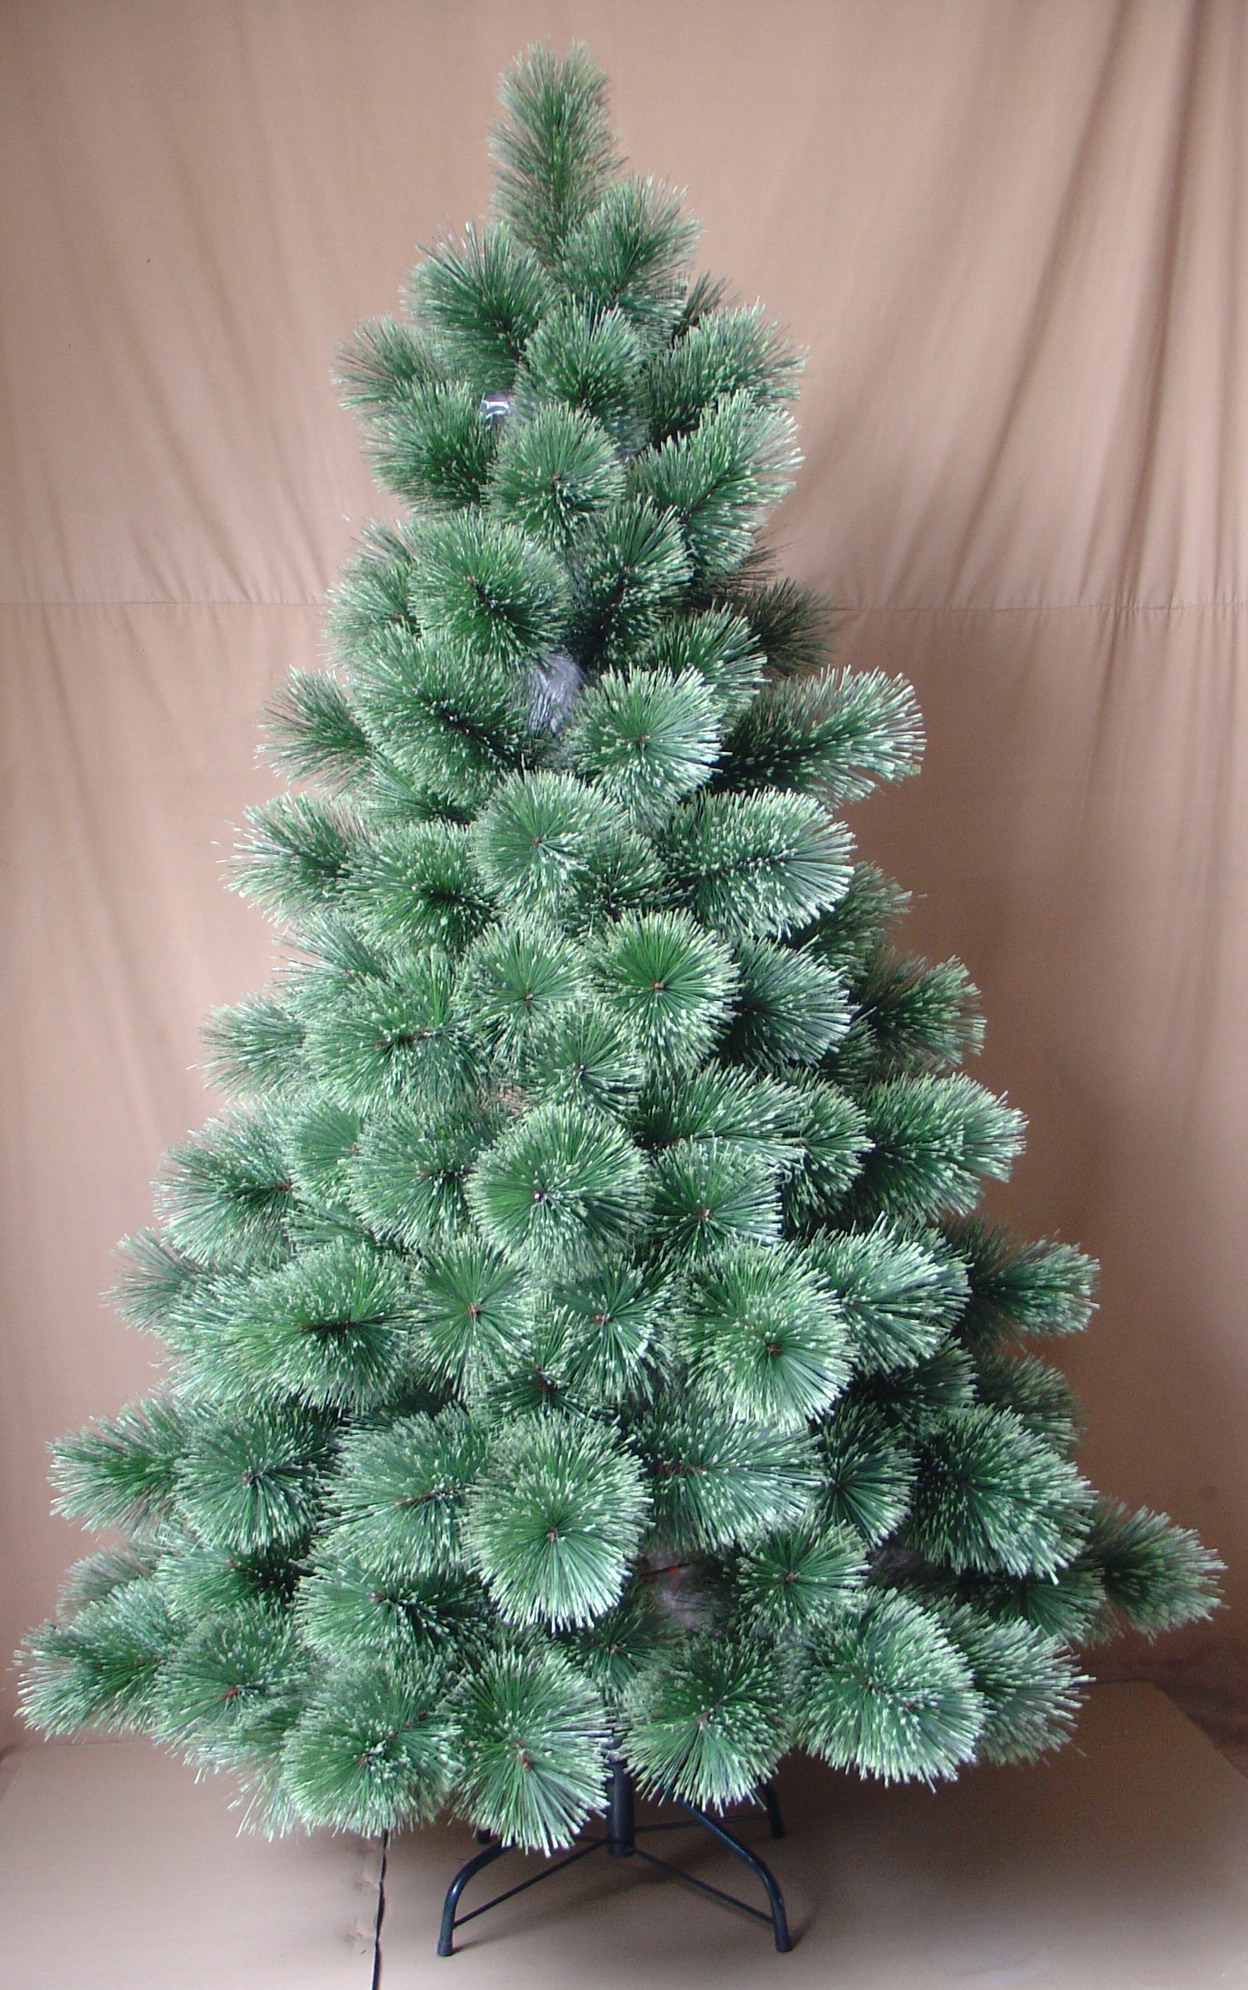 Artificial Christmas Trees Pictures &amp; Photos